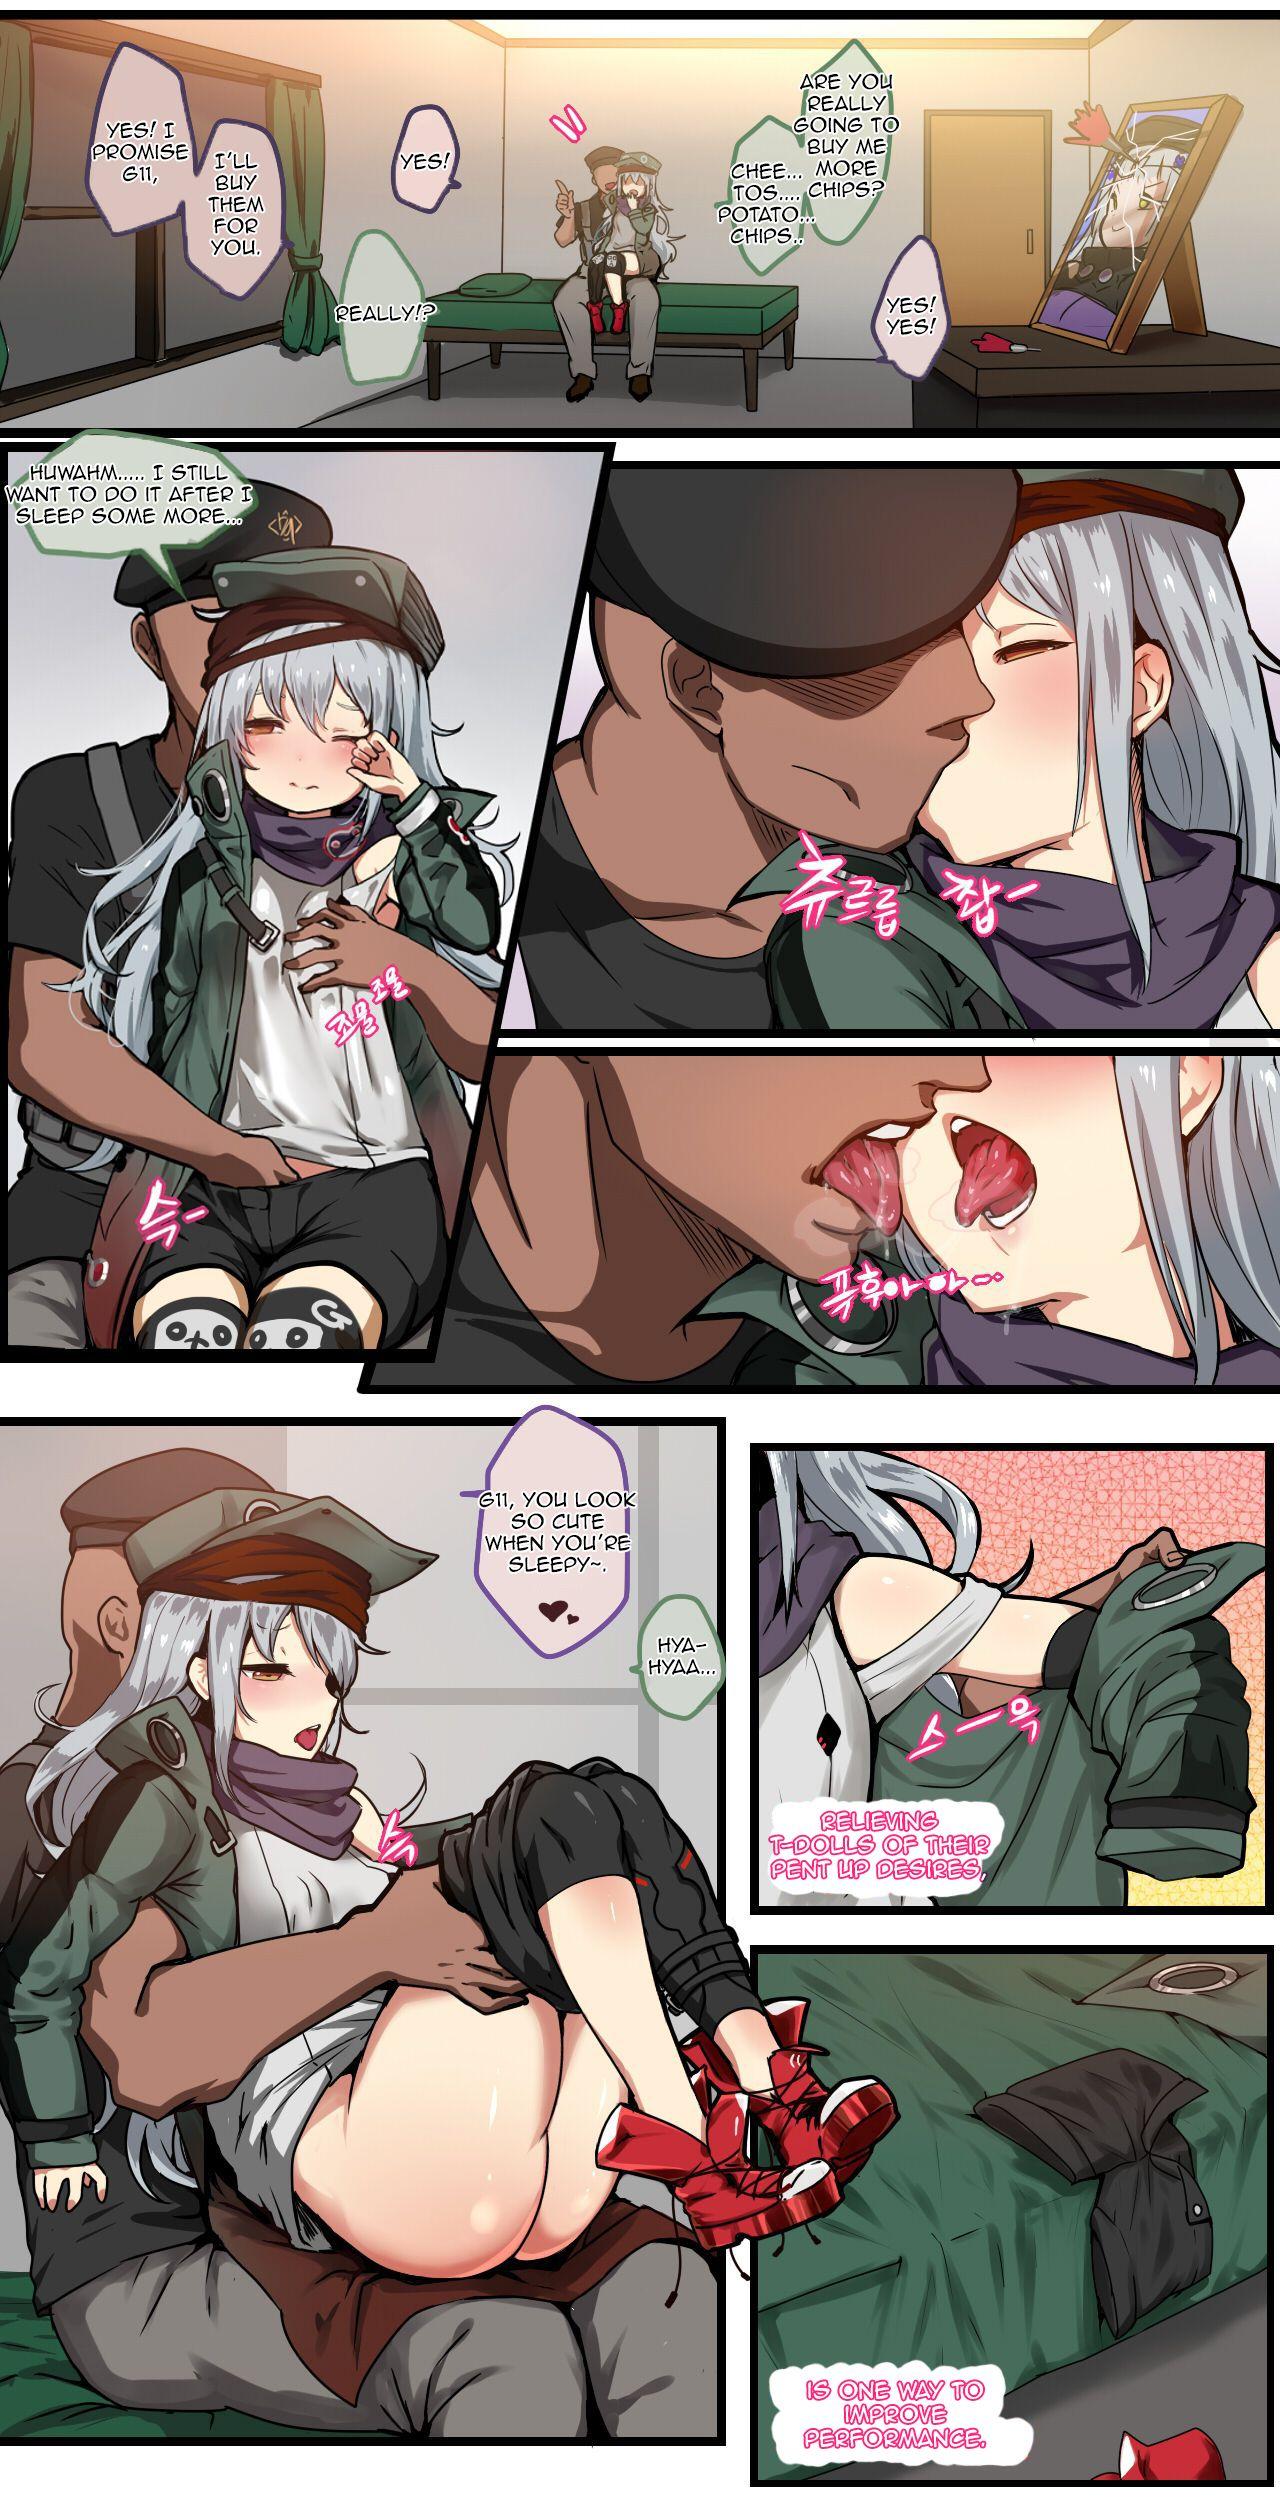 Couple How to use dolls 01 - Girls frontline 18yearsold - Page 2